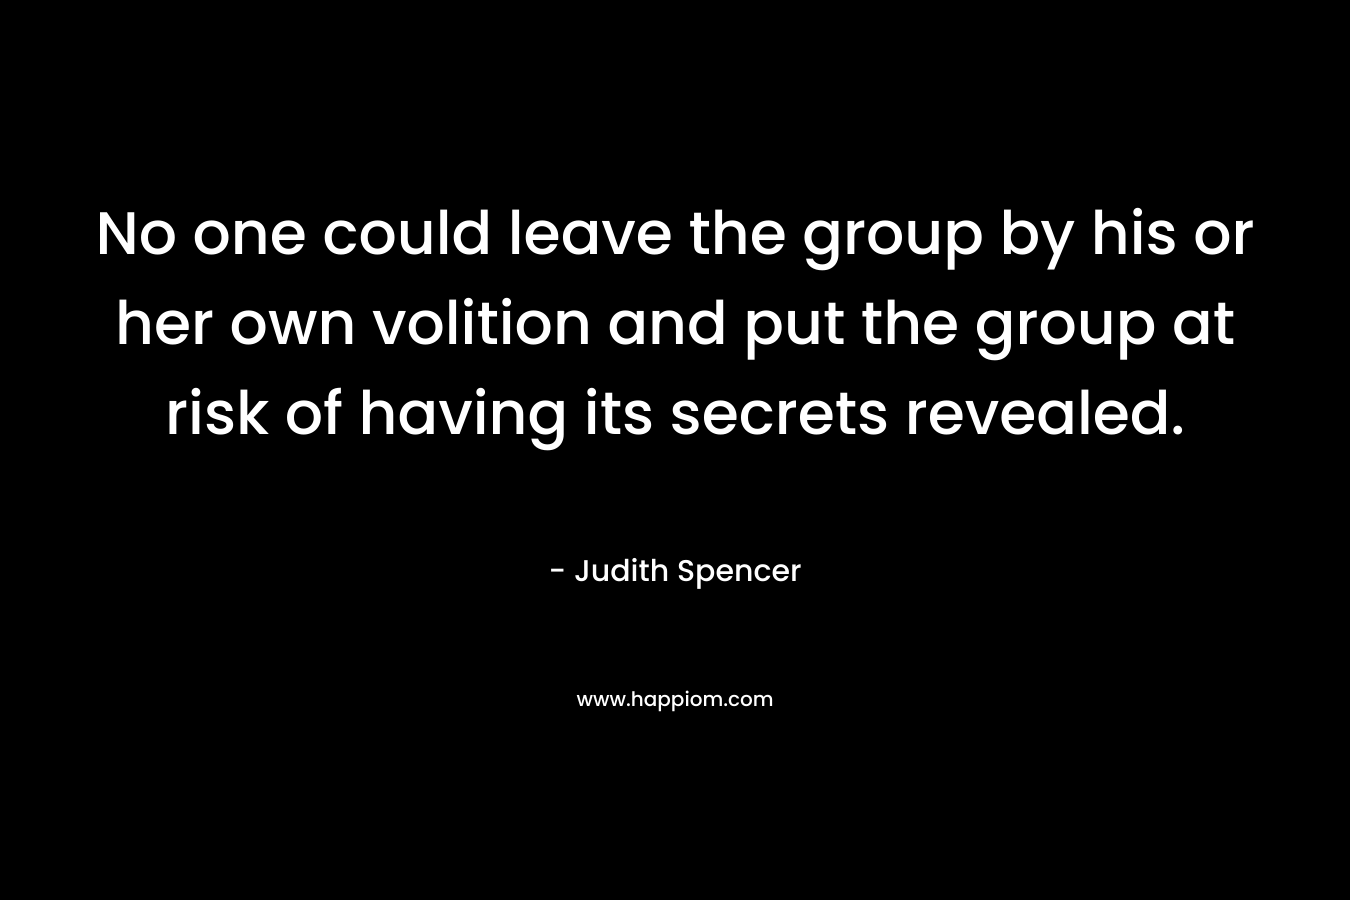 No one could leave the group by his or her own volition and put the group at risk of having its secrets revealed. – Judith Spencer